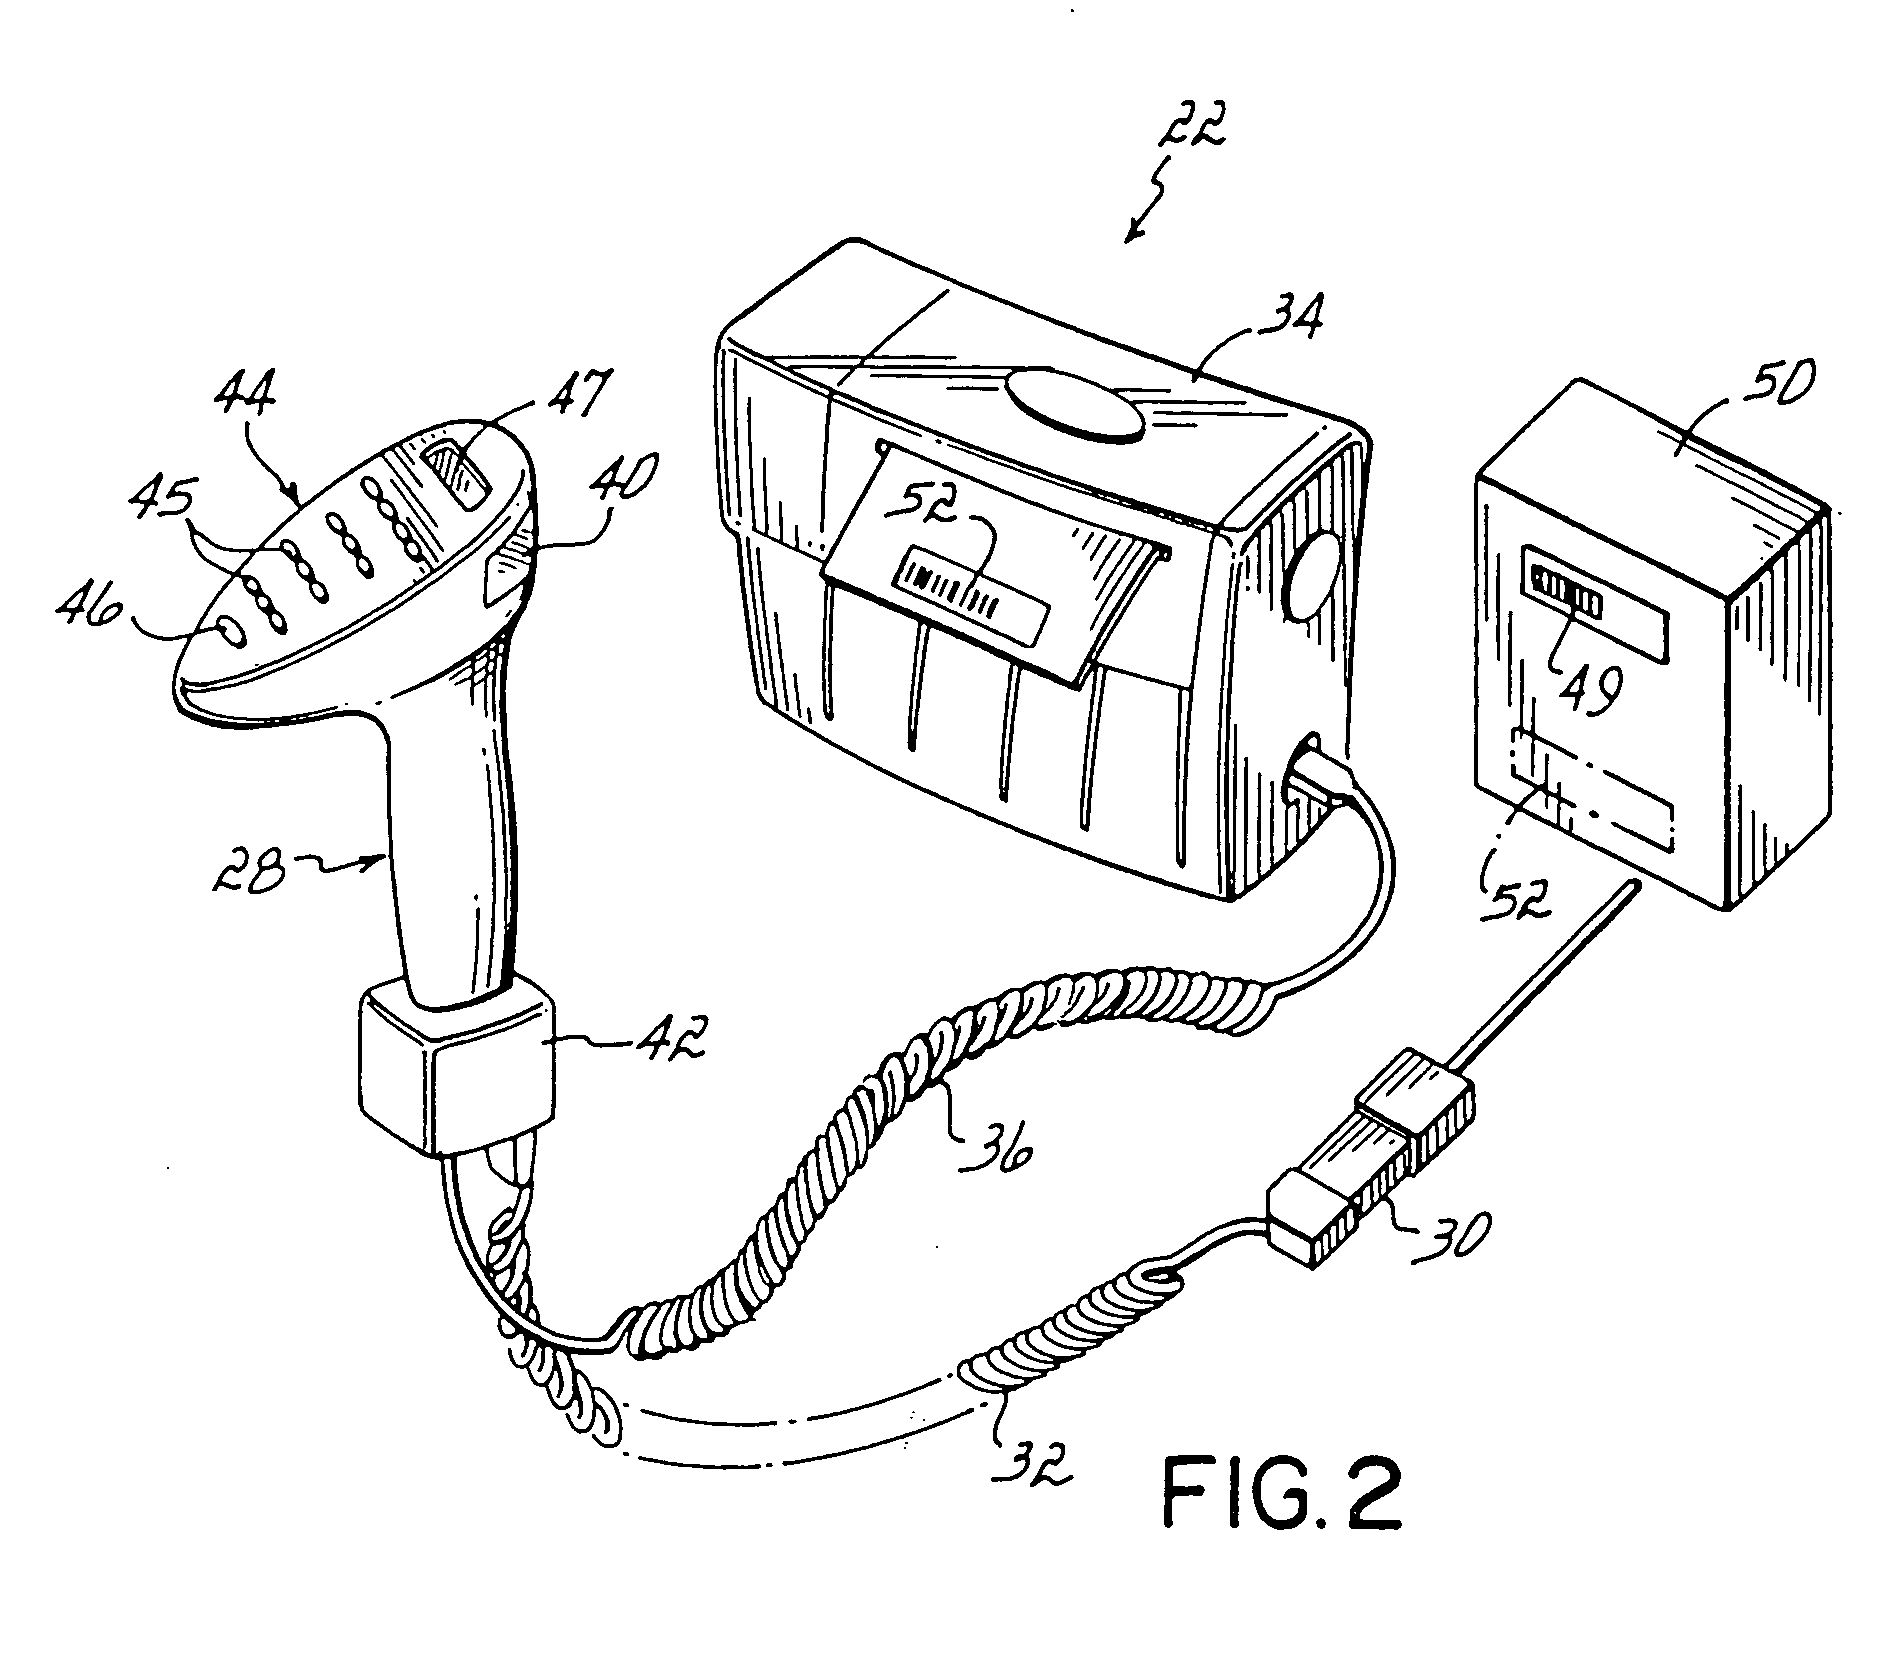 Monitoring and tracking system and method